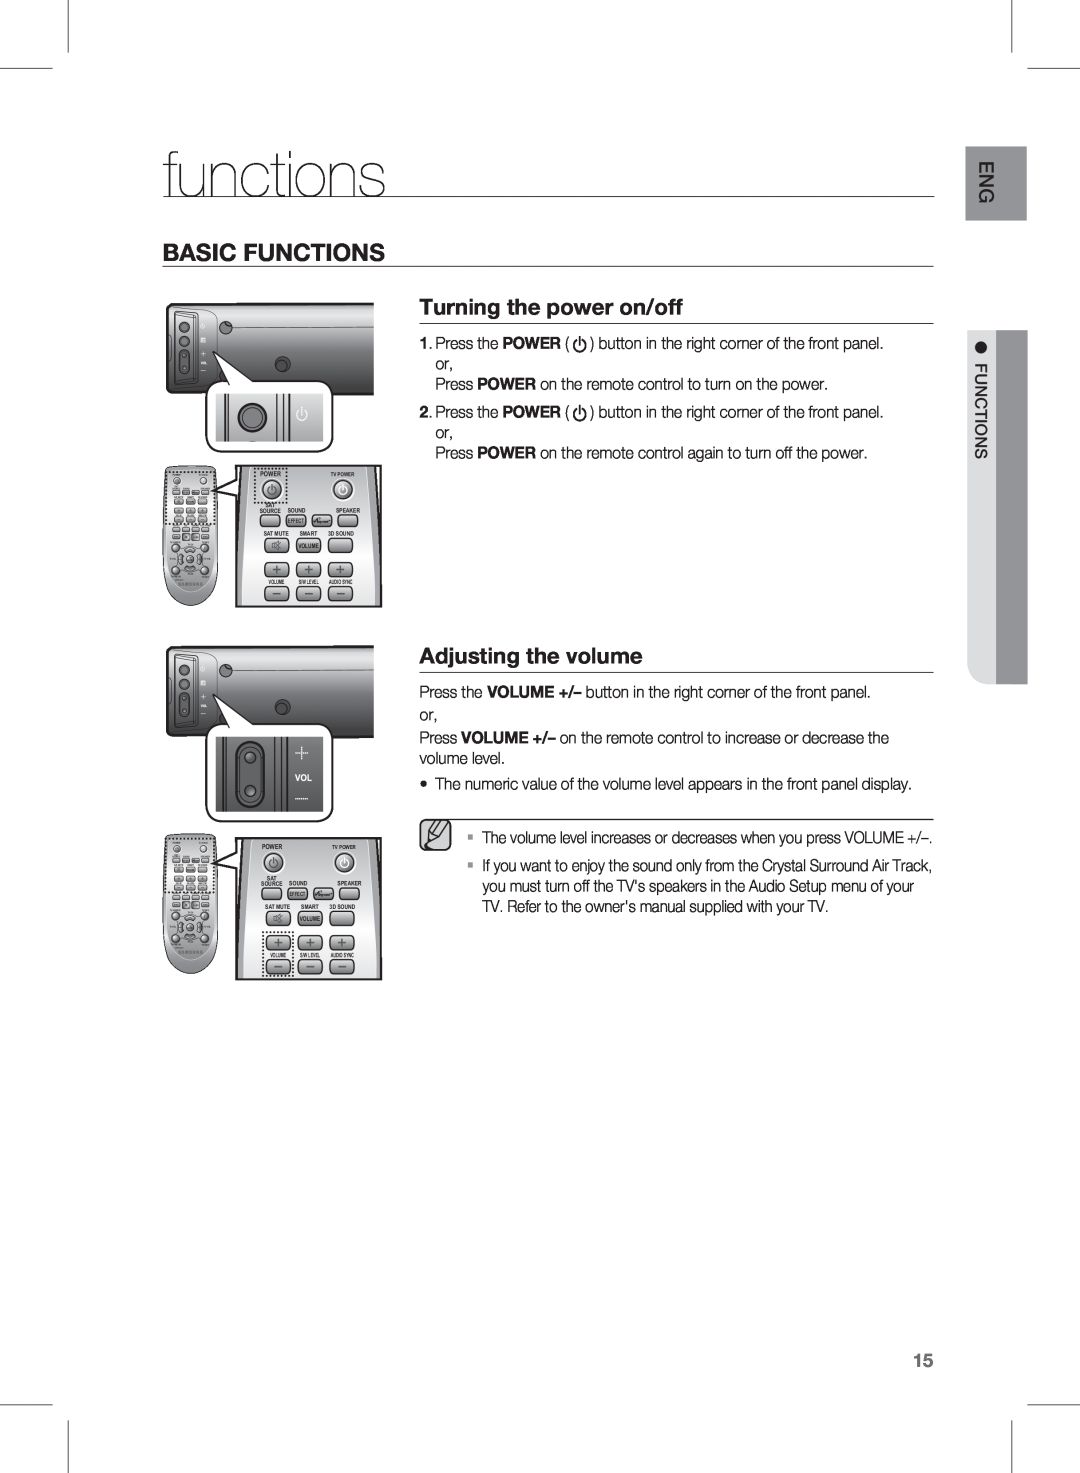 Samsung HW-E450 user manual basic functions, Turning the power on/off, Adjusting the volume 